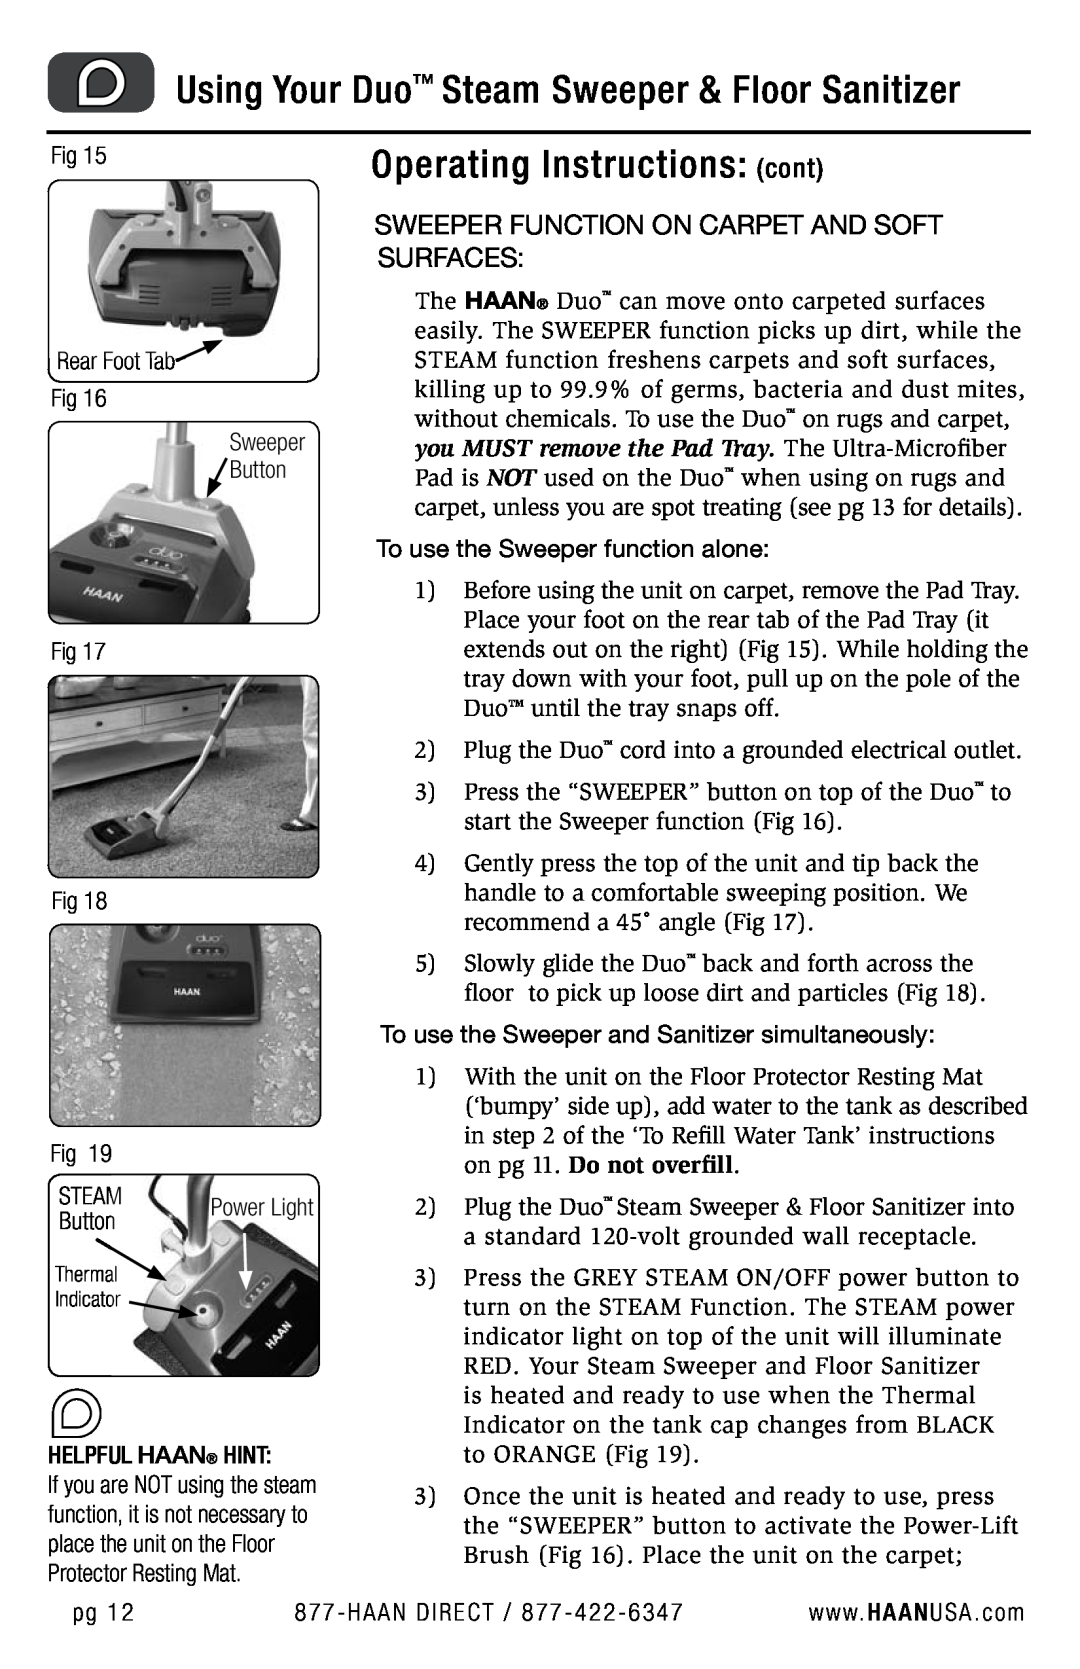 Haan HD-50 user manual Operating Instructions cont, Using Your Duo Steam Sweeper & Floor Sanitizer 